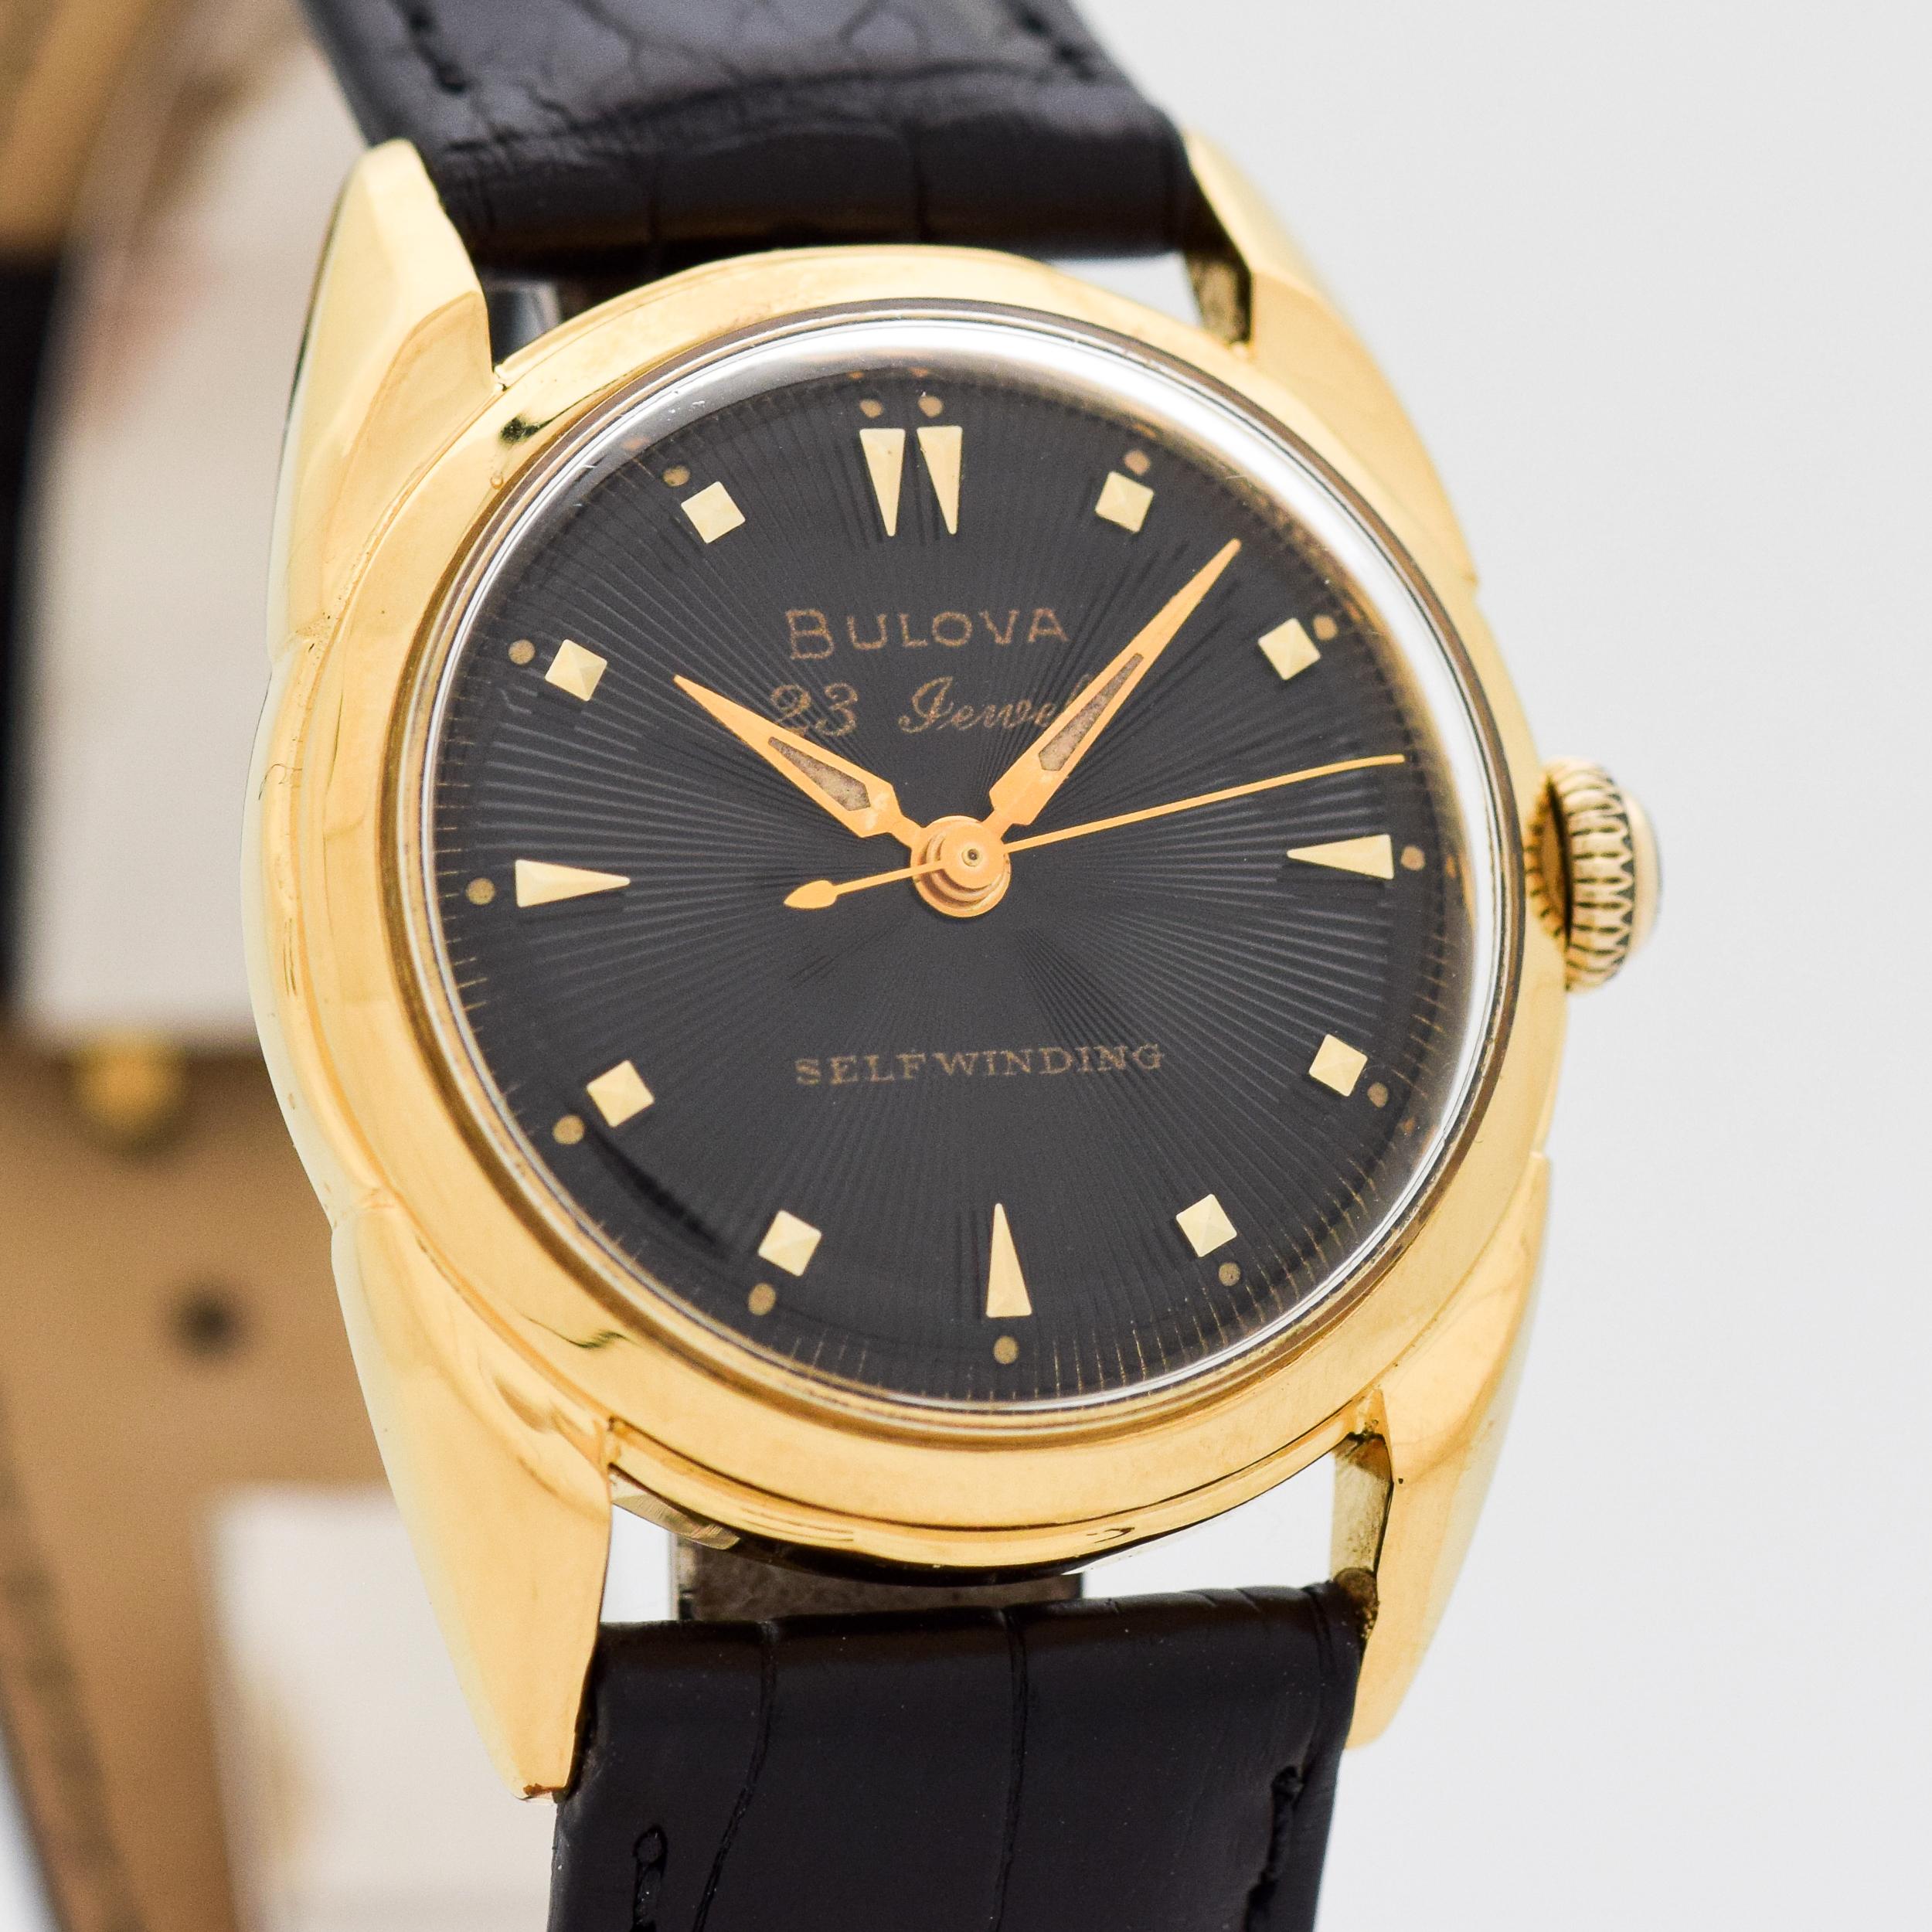 1956 Vintage Bulova 10k Yellow Gold Filled with Stainless Steel Case Back watch with Original Black Dial with Attached Gold Color Beveled Square and Elongated Arrow Markers. 30mm x 38mm lug to lug (1.18 in. x 1.5 in.) - 23 jewel, automatic caliber